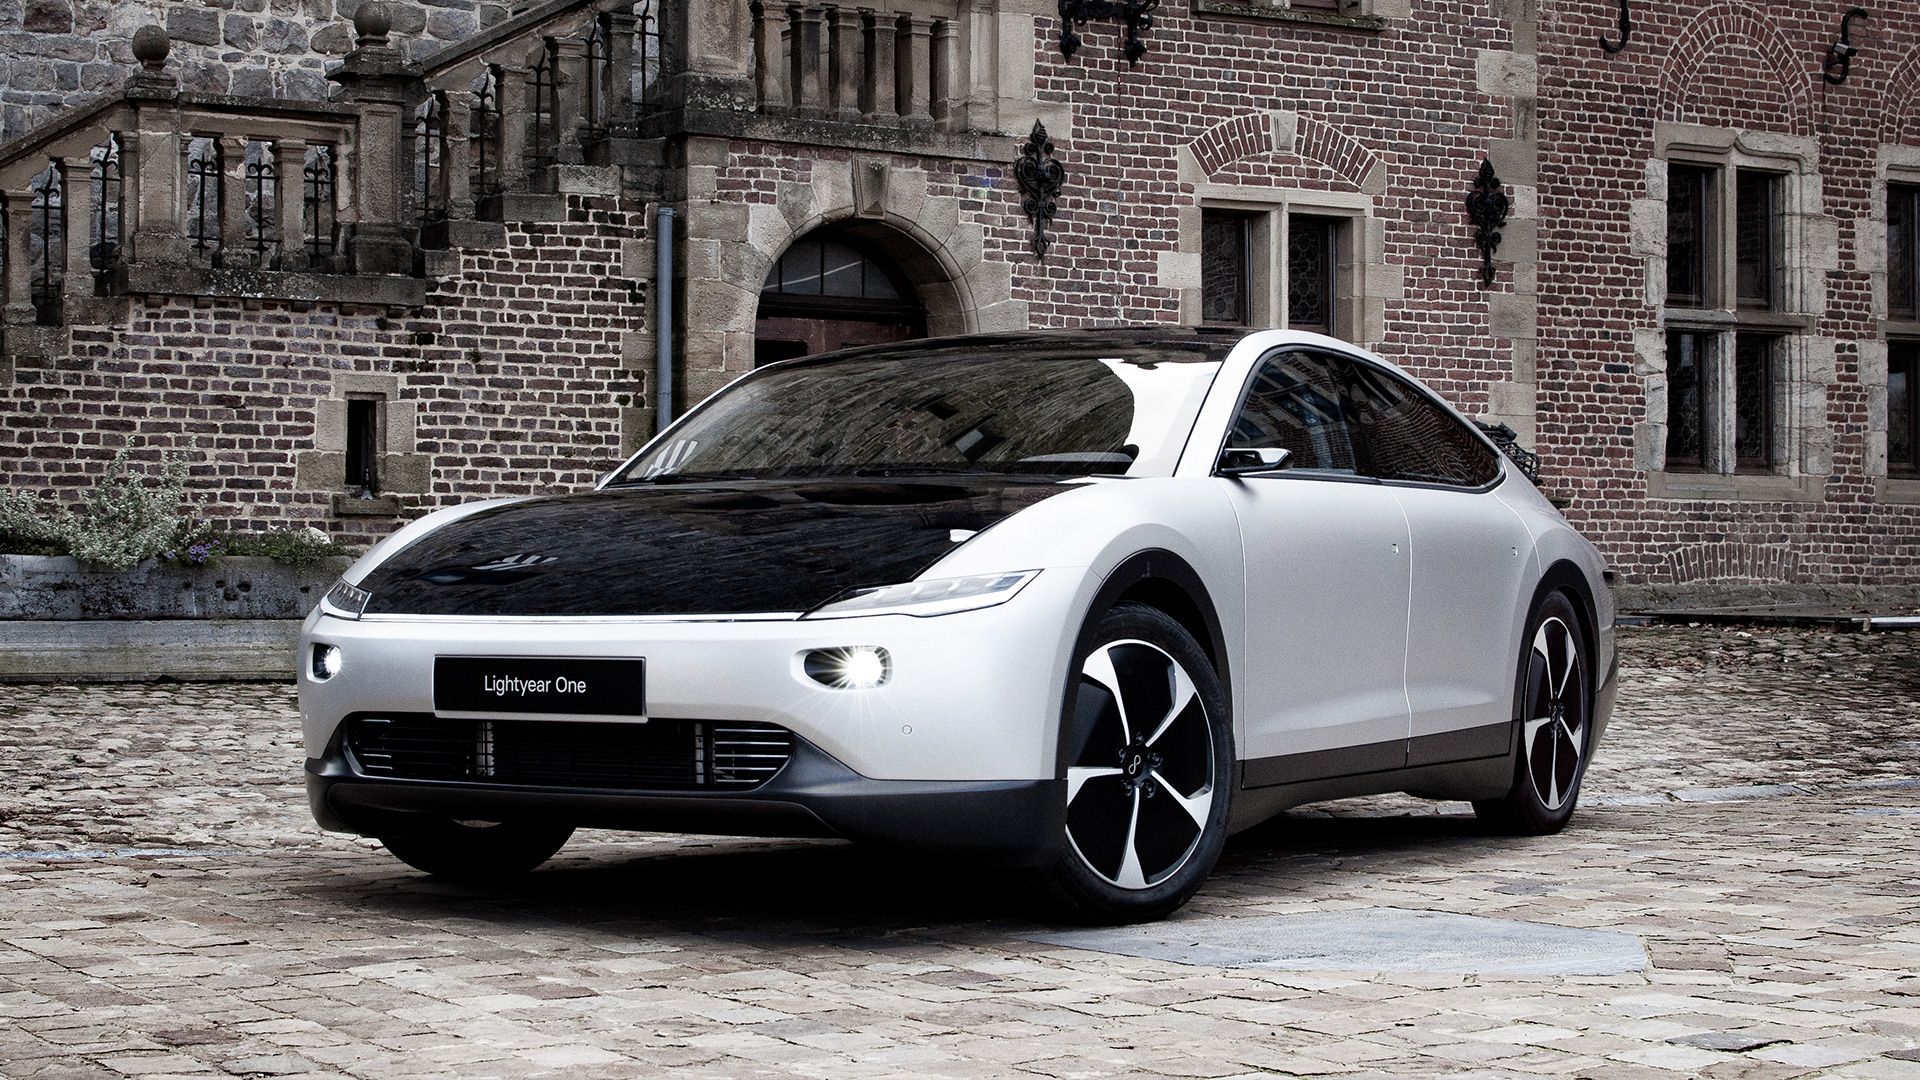 2022 Lightyear One Solar Electric Car - Is It Lightyears ahead of the Competition?